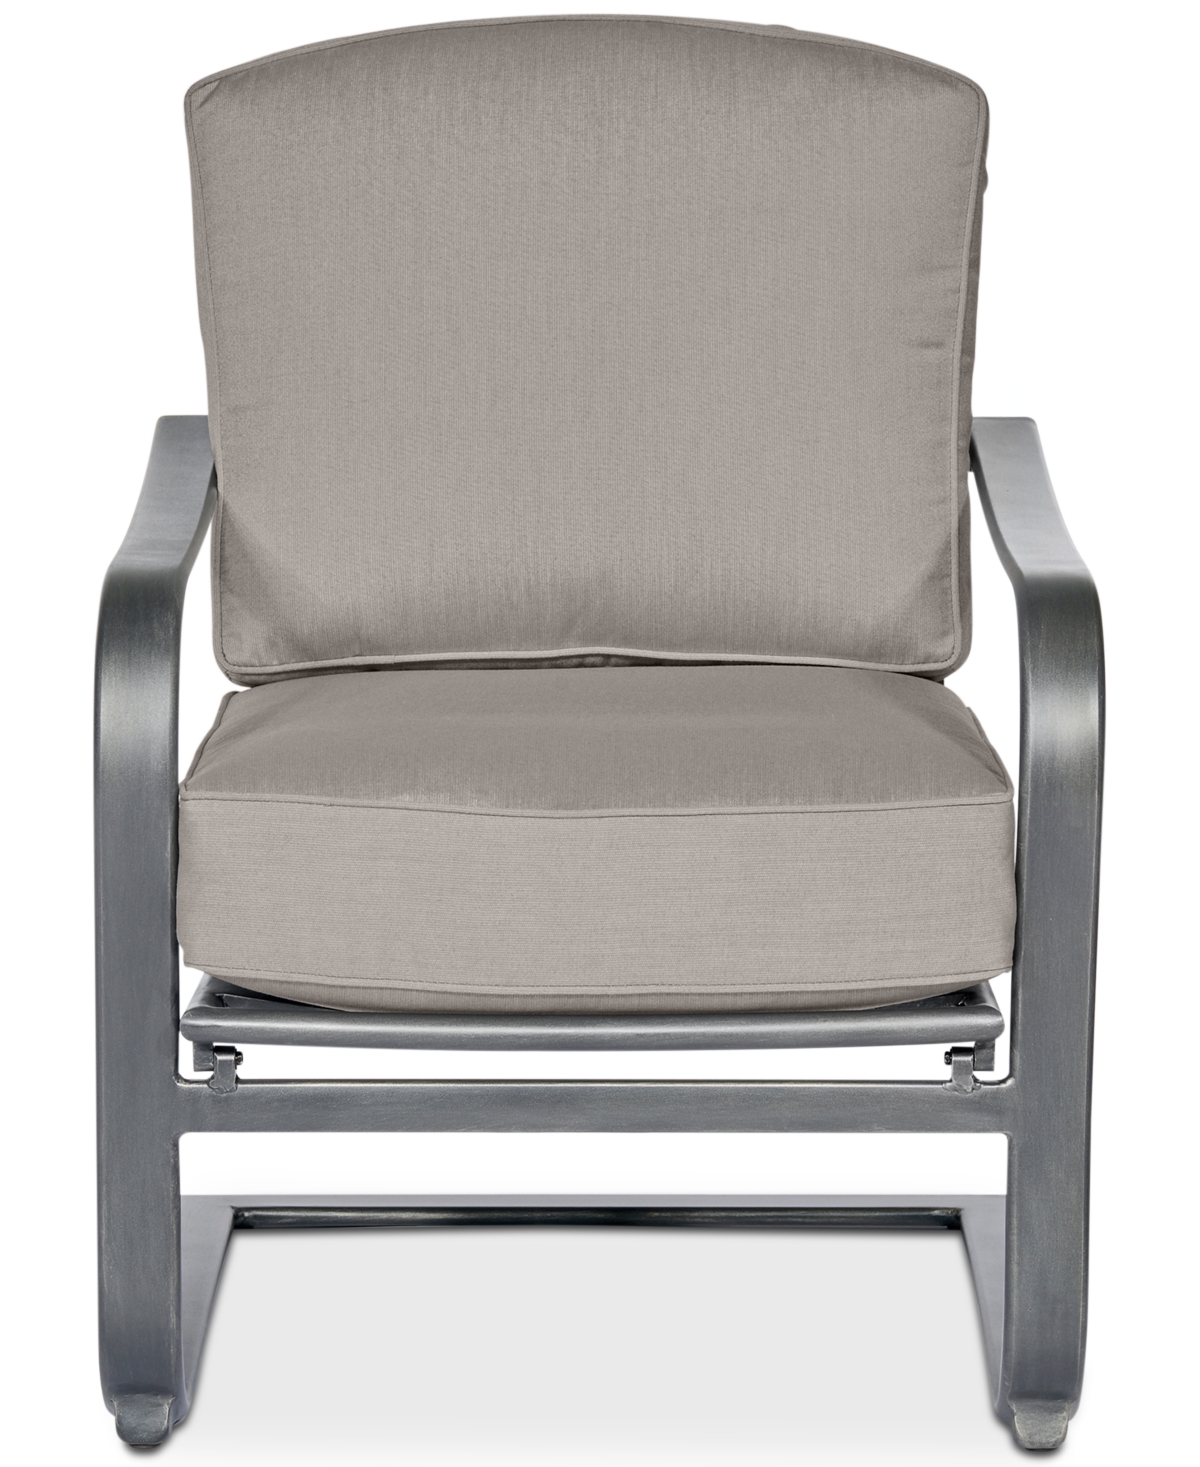 Agio Closeout! Marlough Wide Slat C-spring Chair, With Outdoor Cushions, Created For Macy's In Outdura Storm Smoke